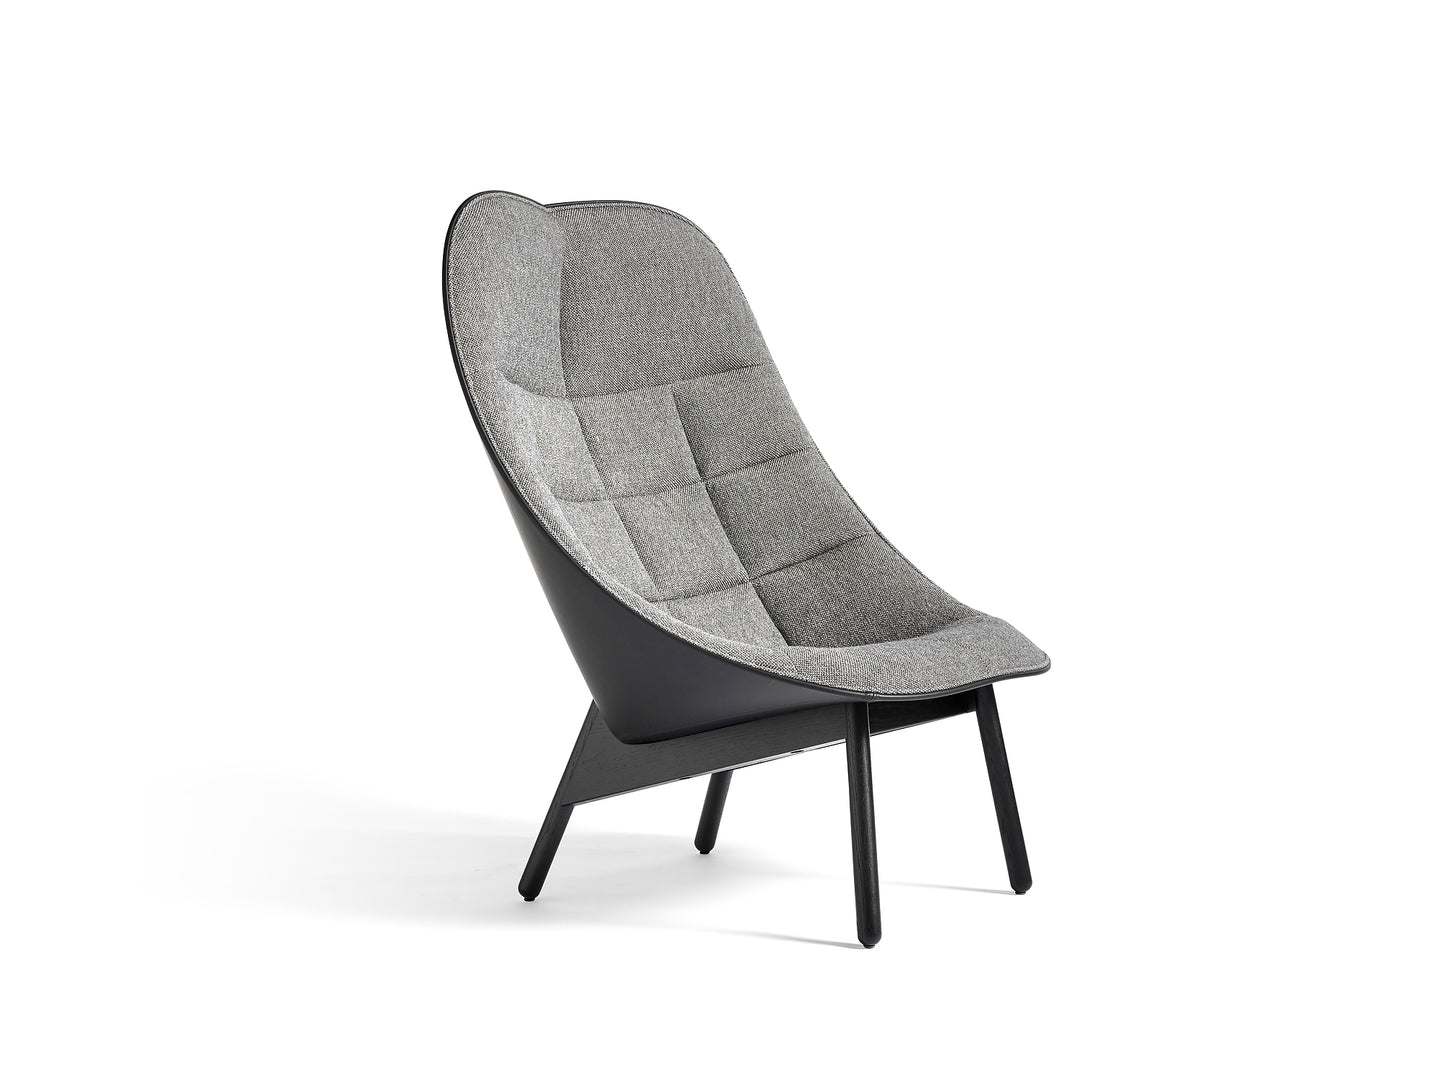 Uchiwa Quilted Lounge Chair / Fairway Grey Front / Black Silk Leather Back / by HAY